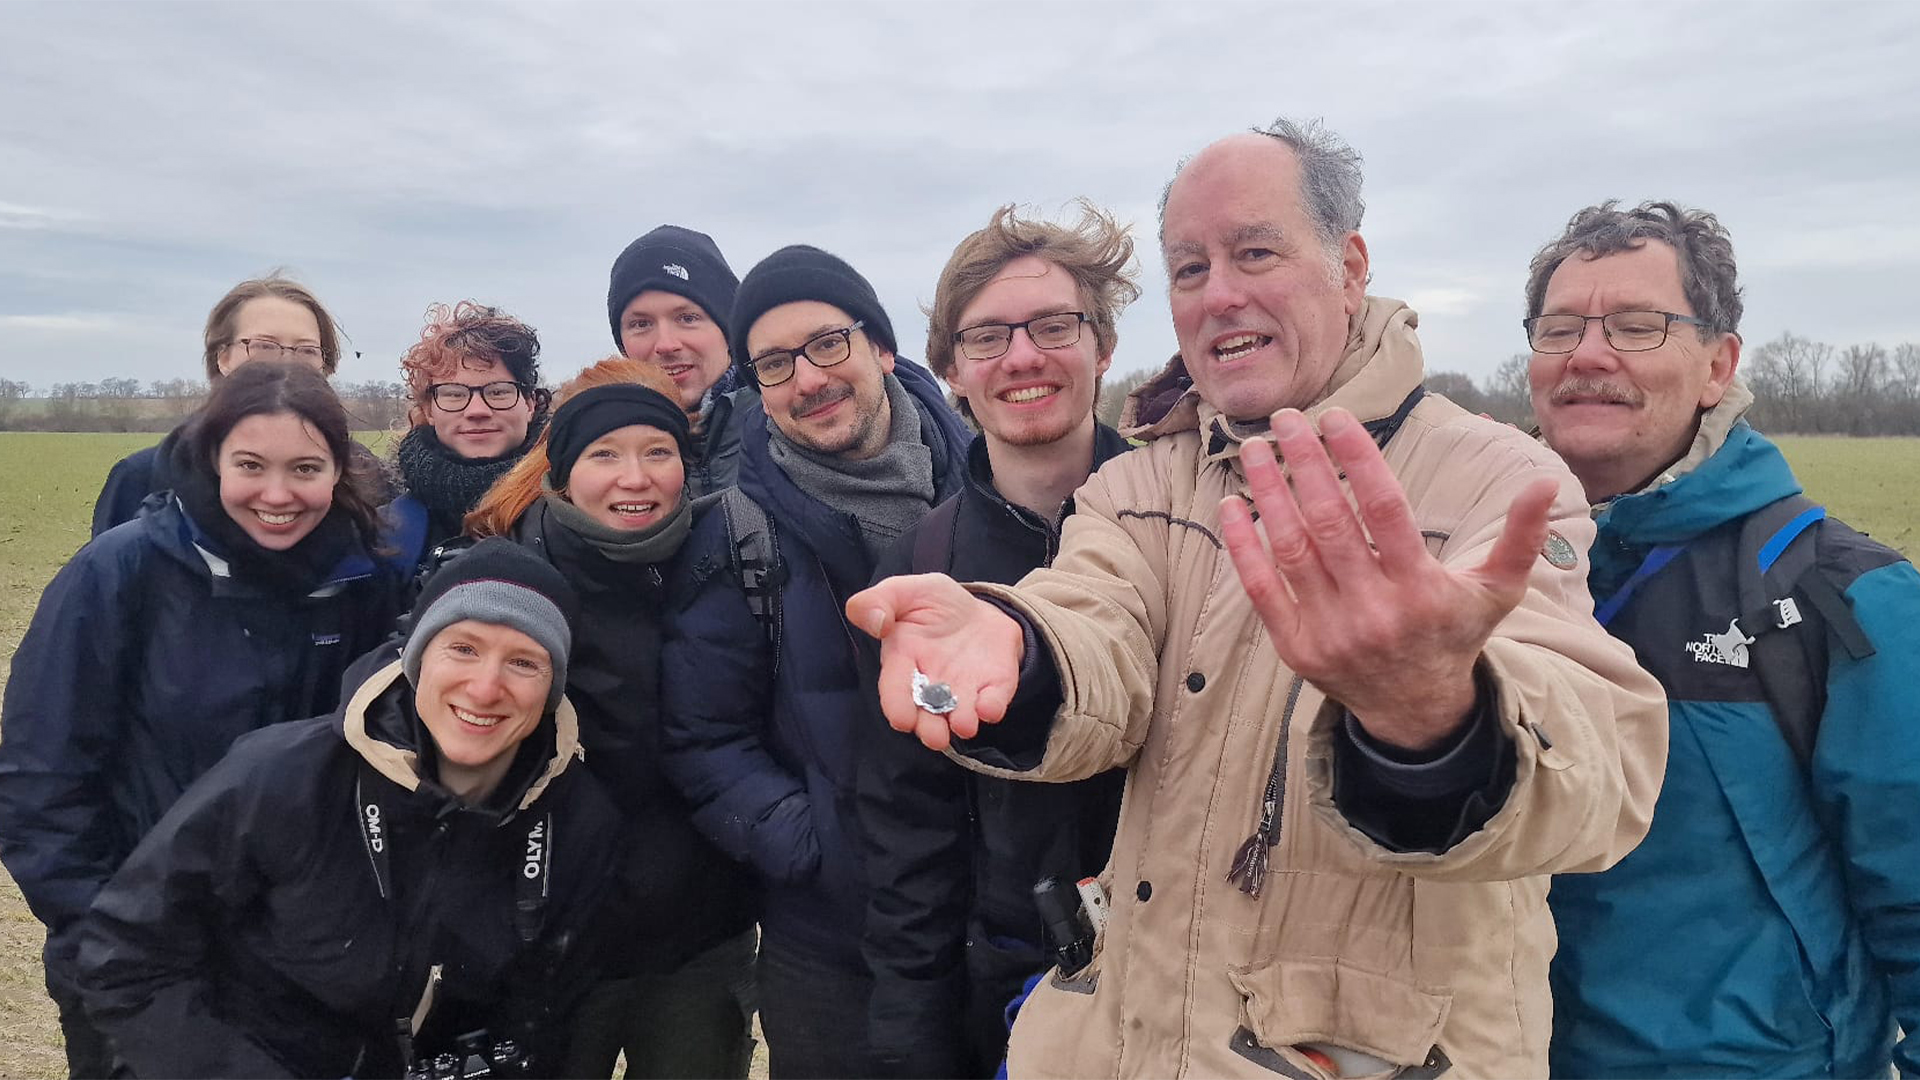 A fragment of 2024 BX1 held by Peter Jenniskens, surrounded by the team who assisted in finding it, now confirmed to be a rare aubrite meteorite.